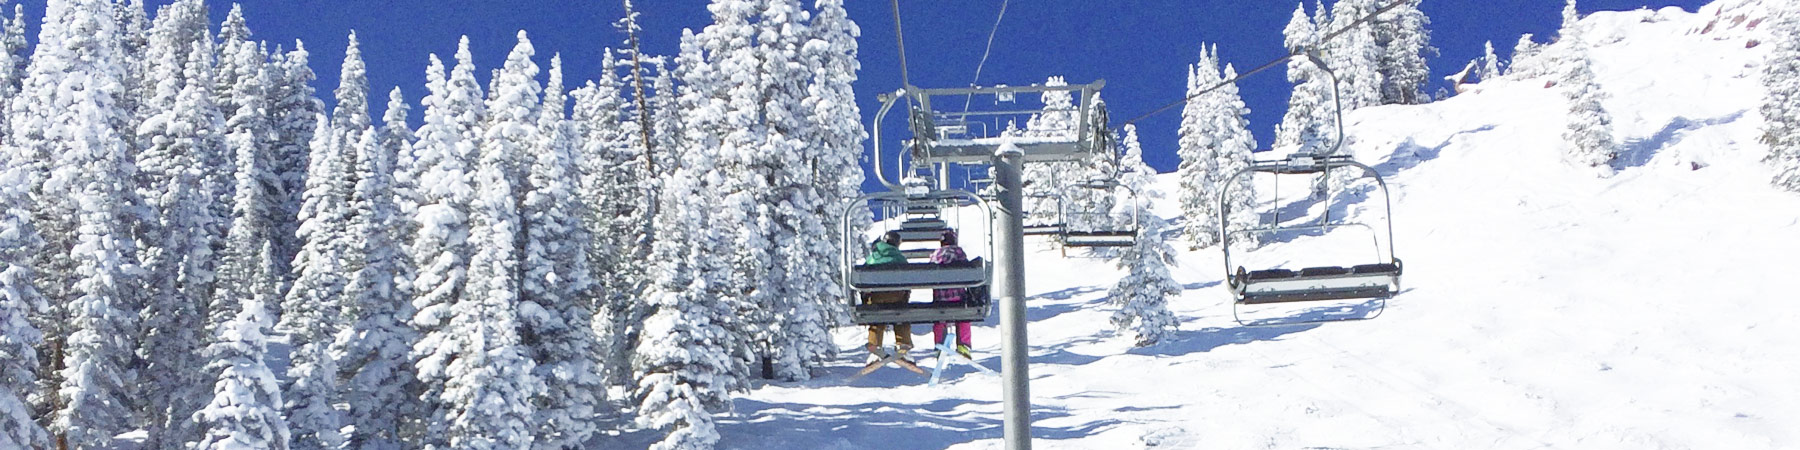 Winter swoons riding Aspen’s historic Lift 1A on the epic powder days of winter